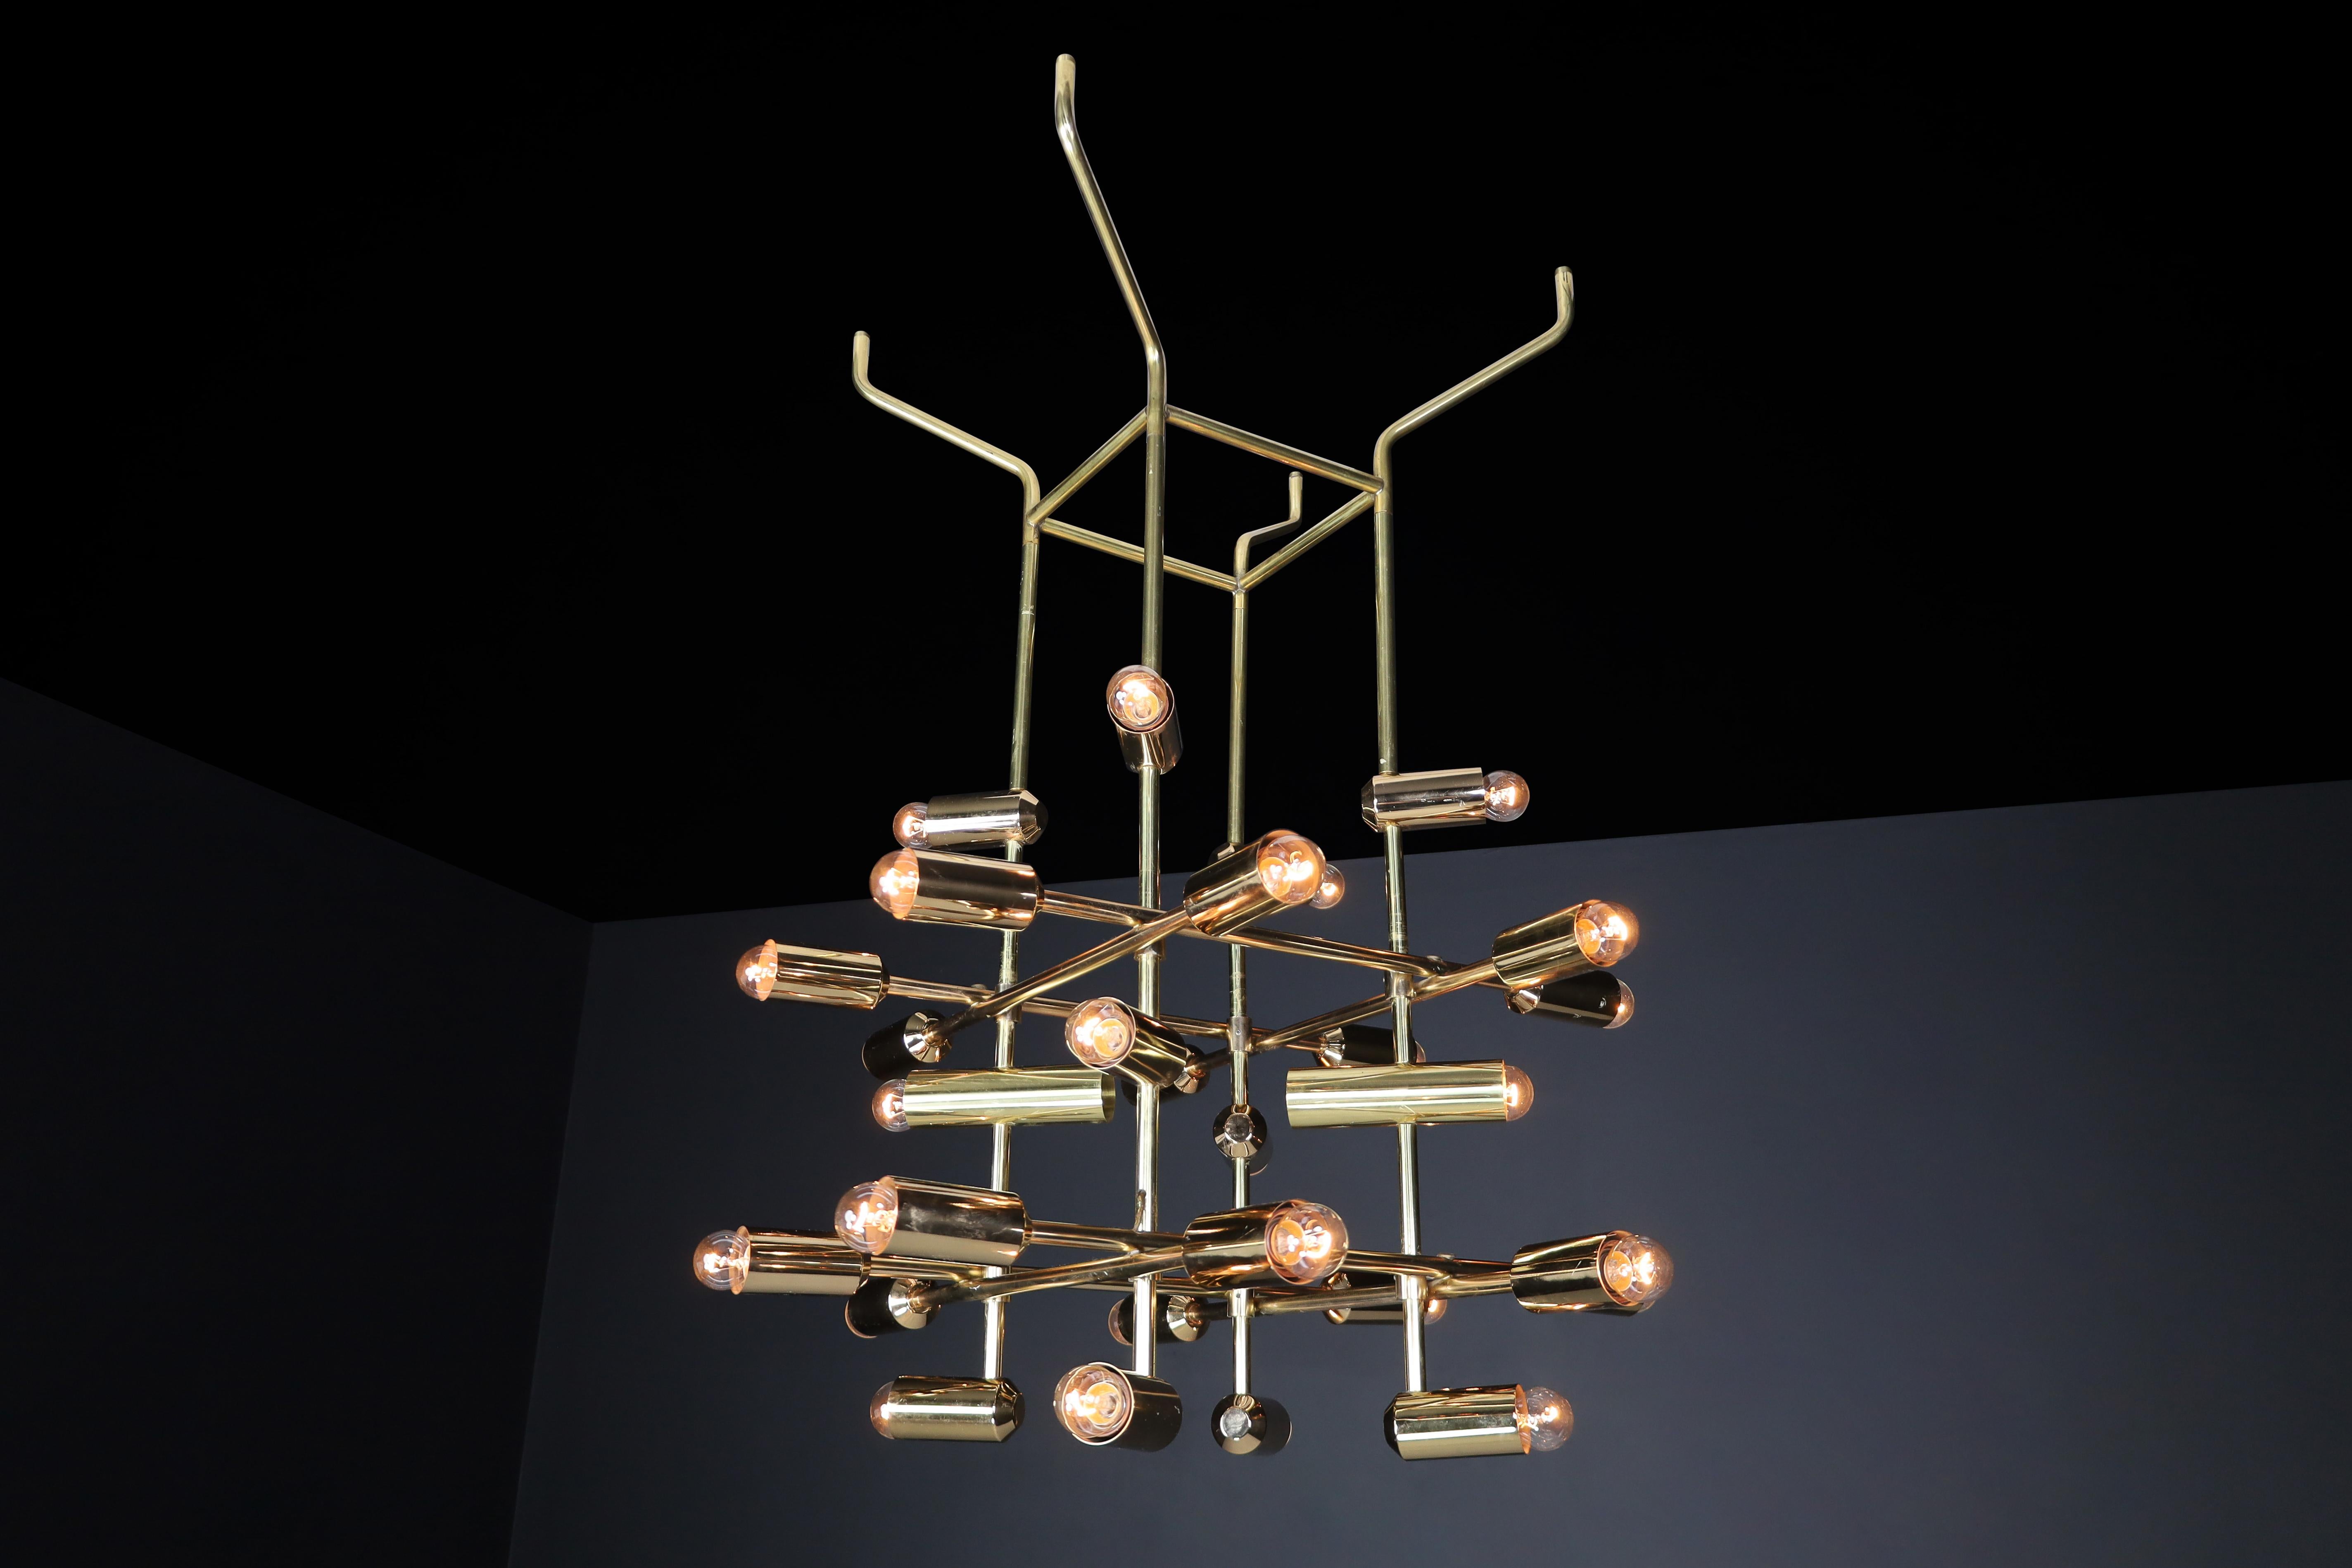 Mid-Century Brass Chandelier wit 28 lights, Switzerland 1960s.

A large mid-century chandelier made of brass was manufactured in Switzerland in the 1960s and is now available in Europe. The chandelier has a unique design consisting of a brass